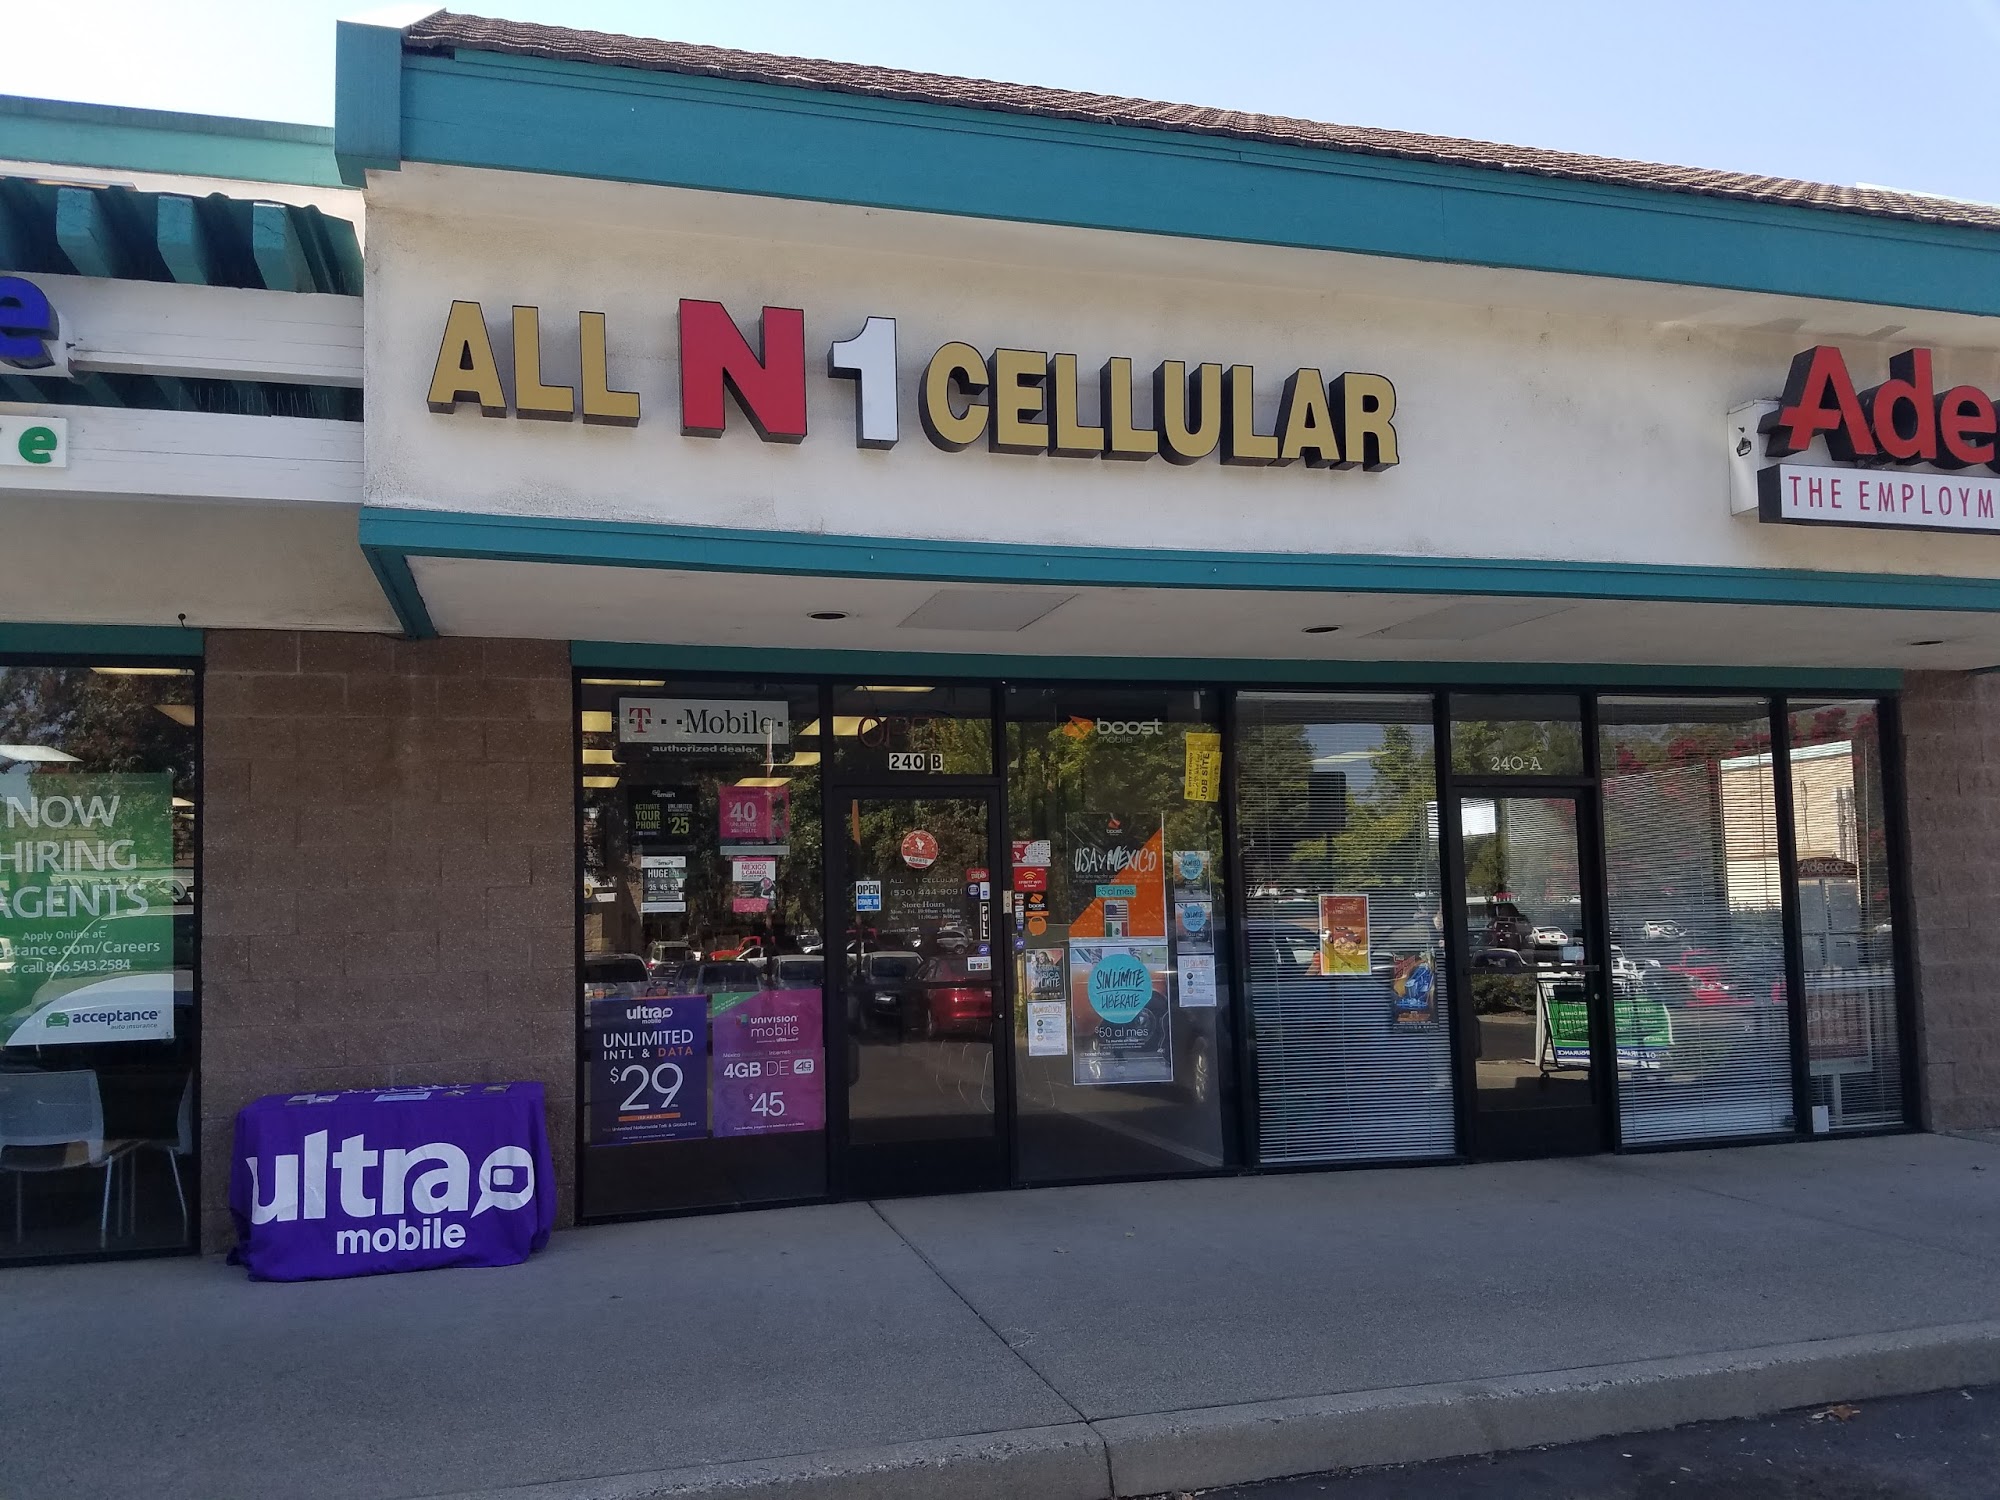 PagePlus Cellular